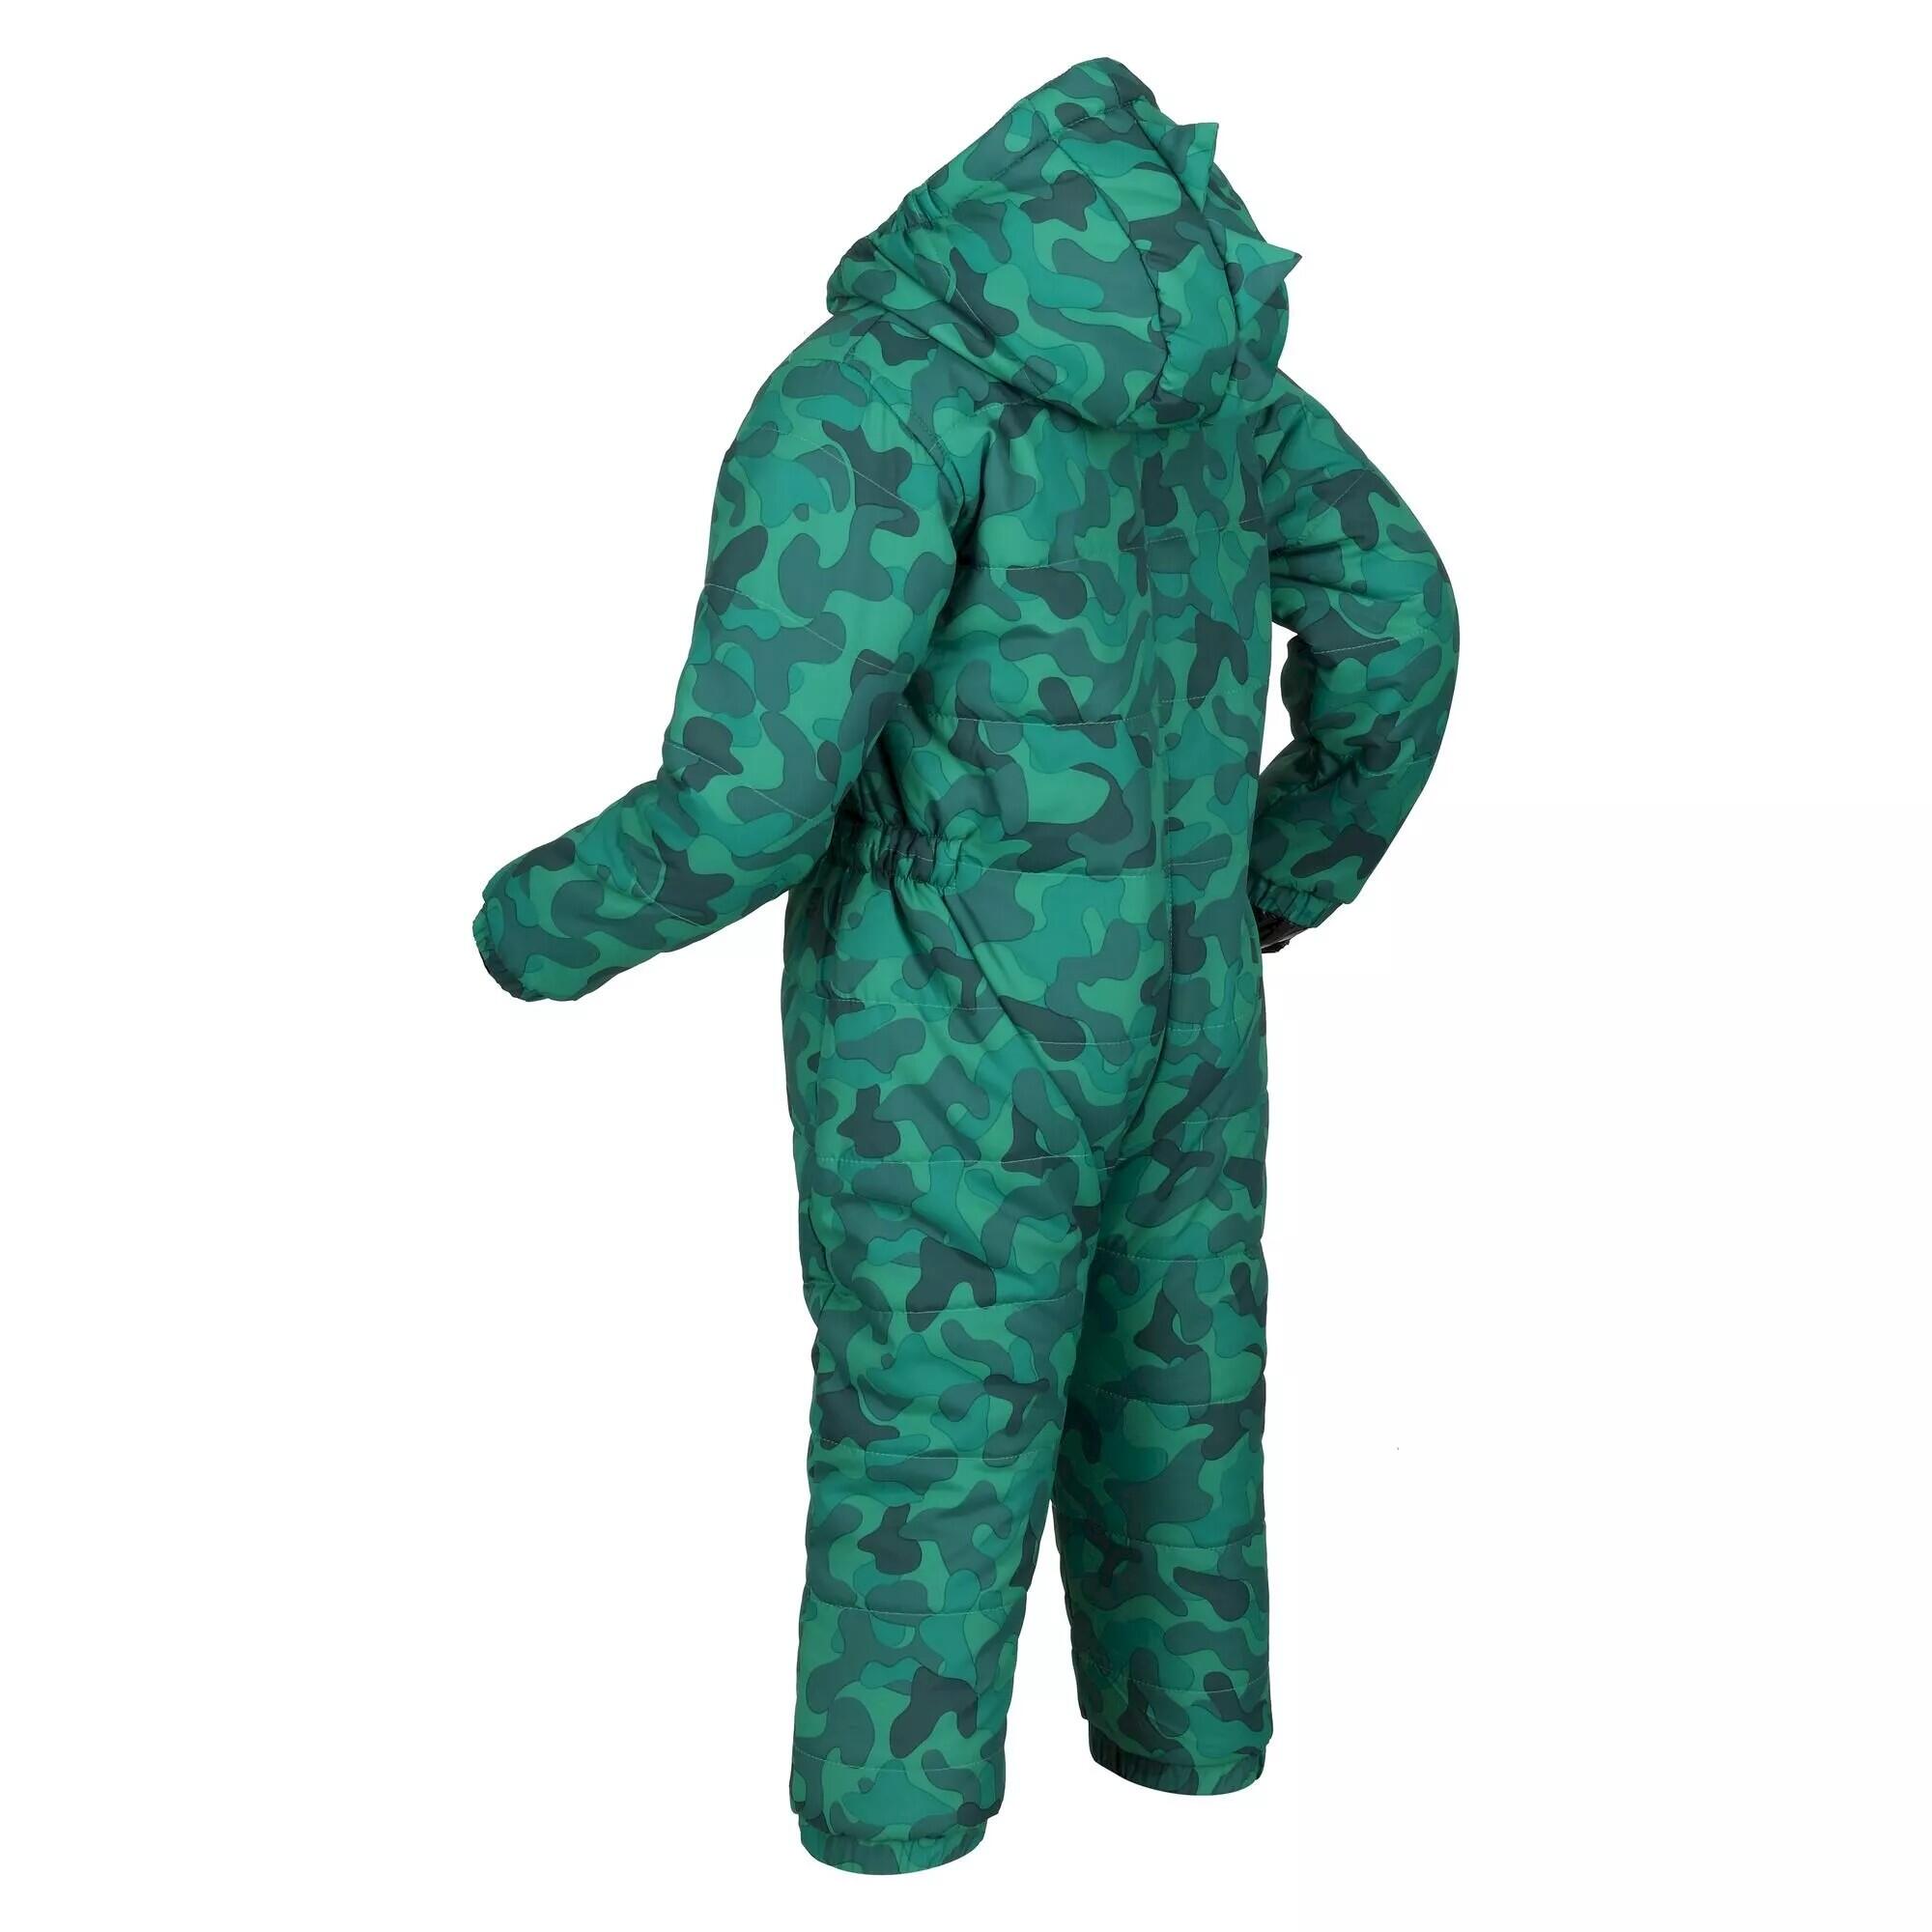 Childrens/Kids Penrose Camo Puddle Suit (Jellybean Green) 4/5